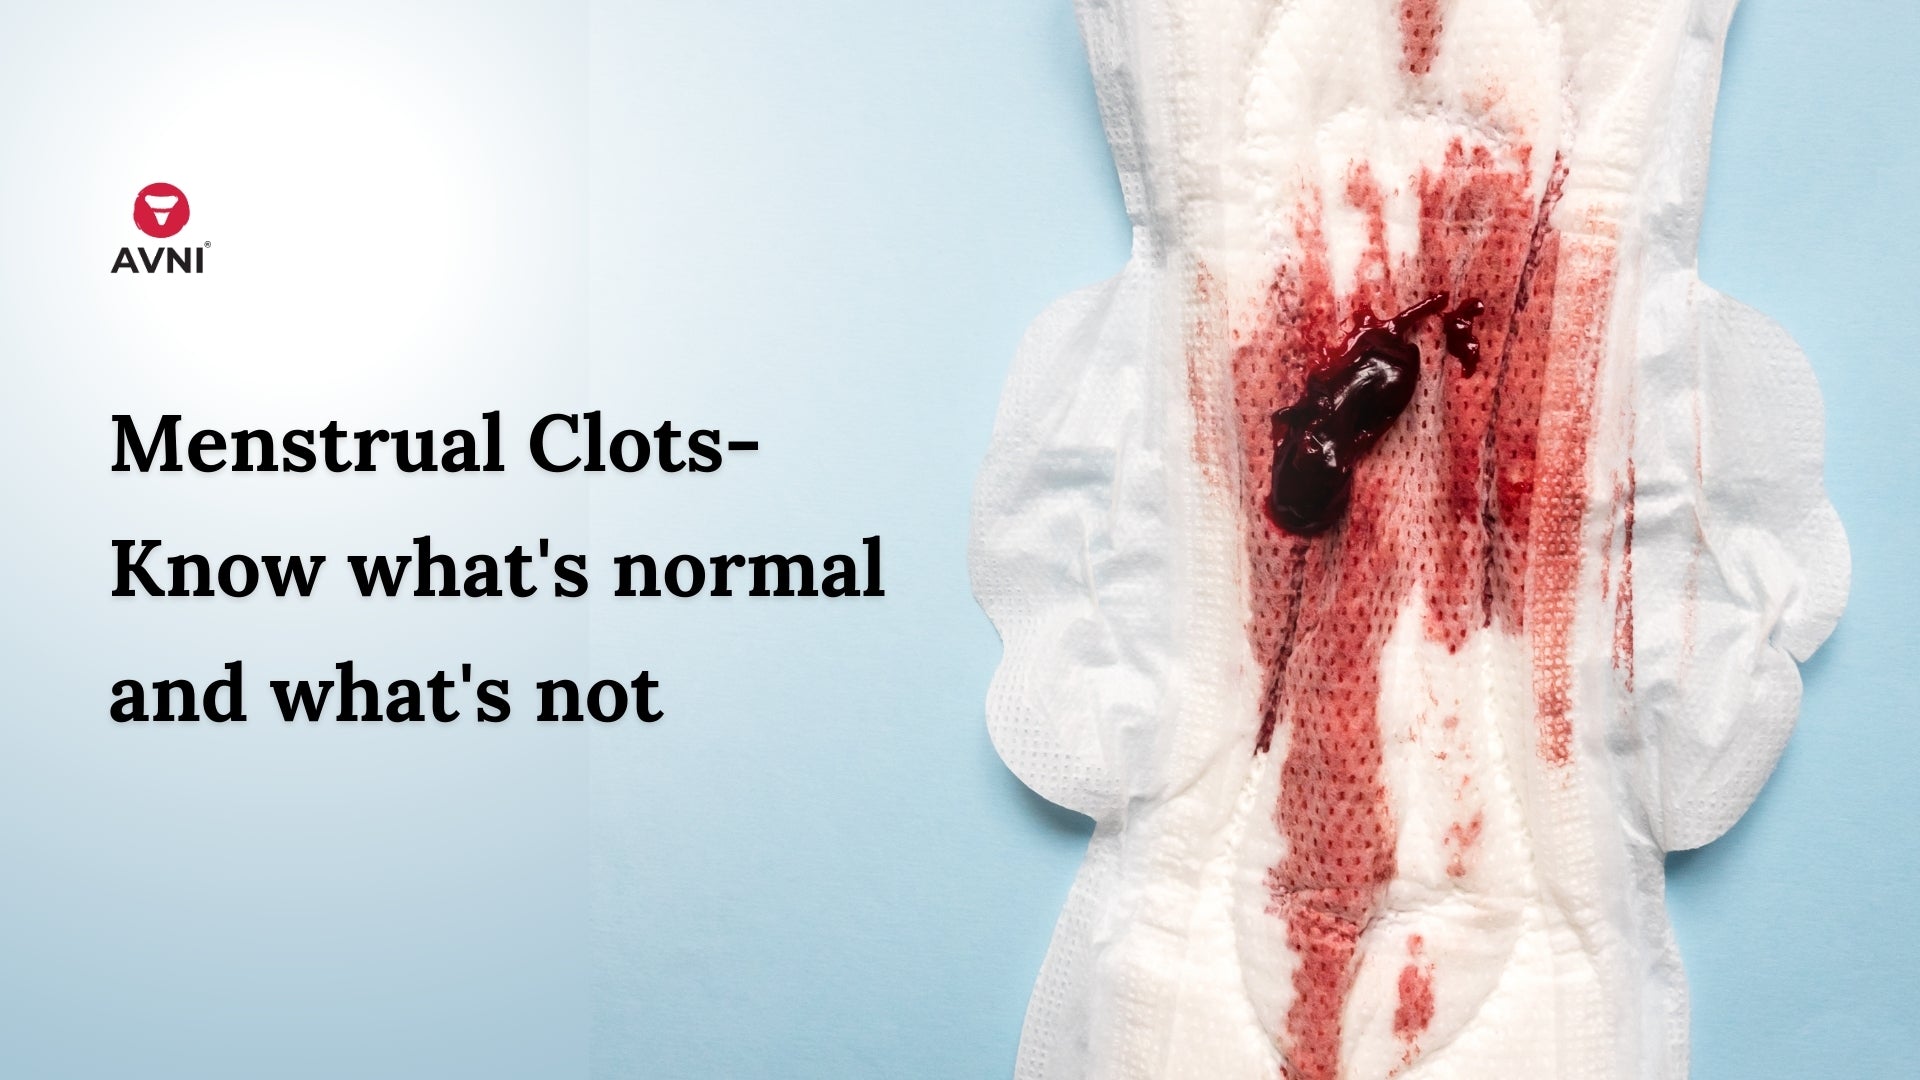 Spotting instead of period? Find out why it happens here